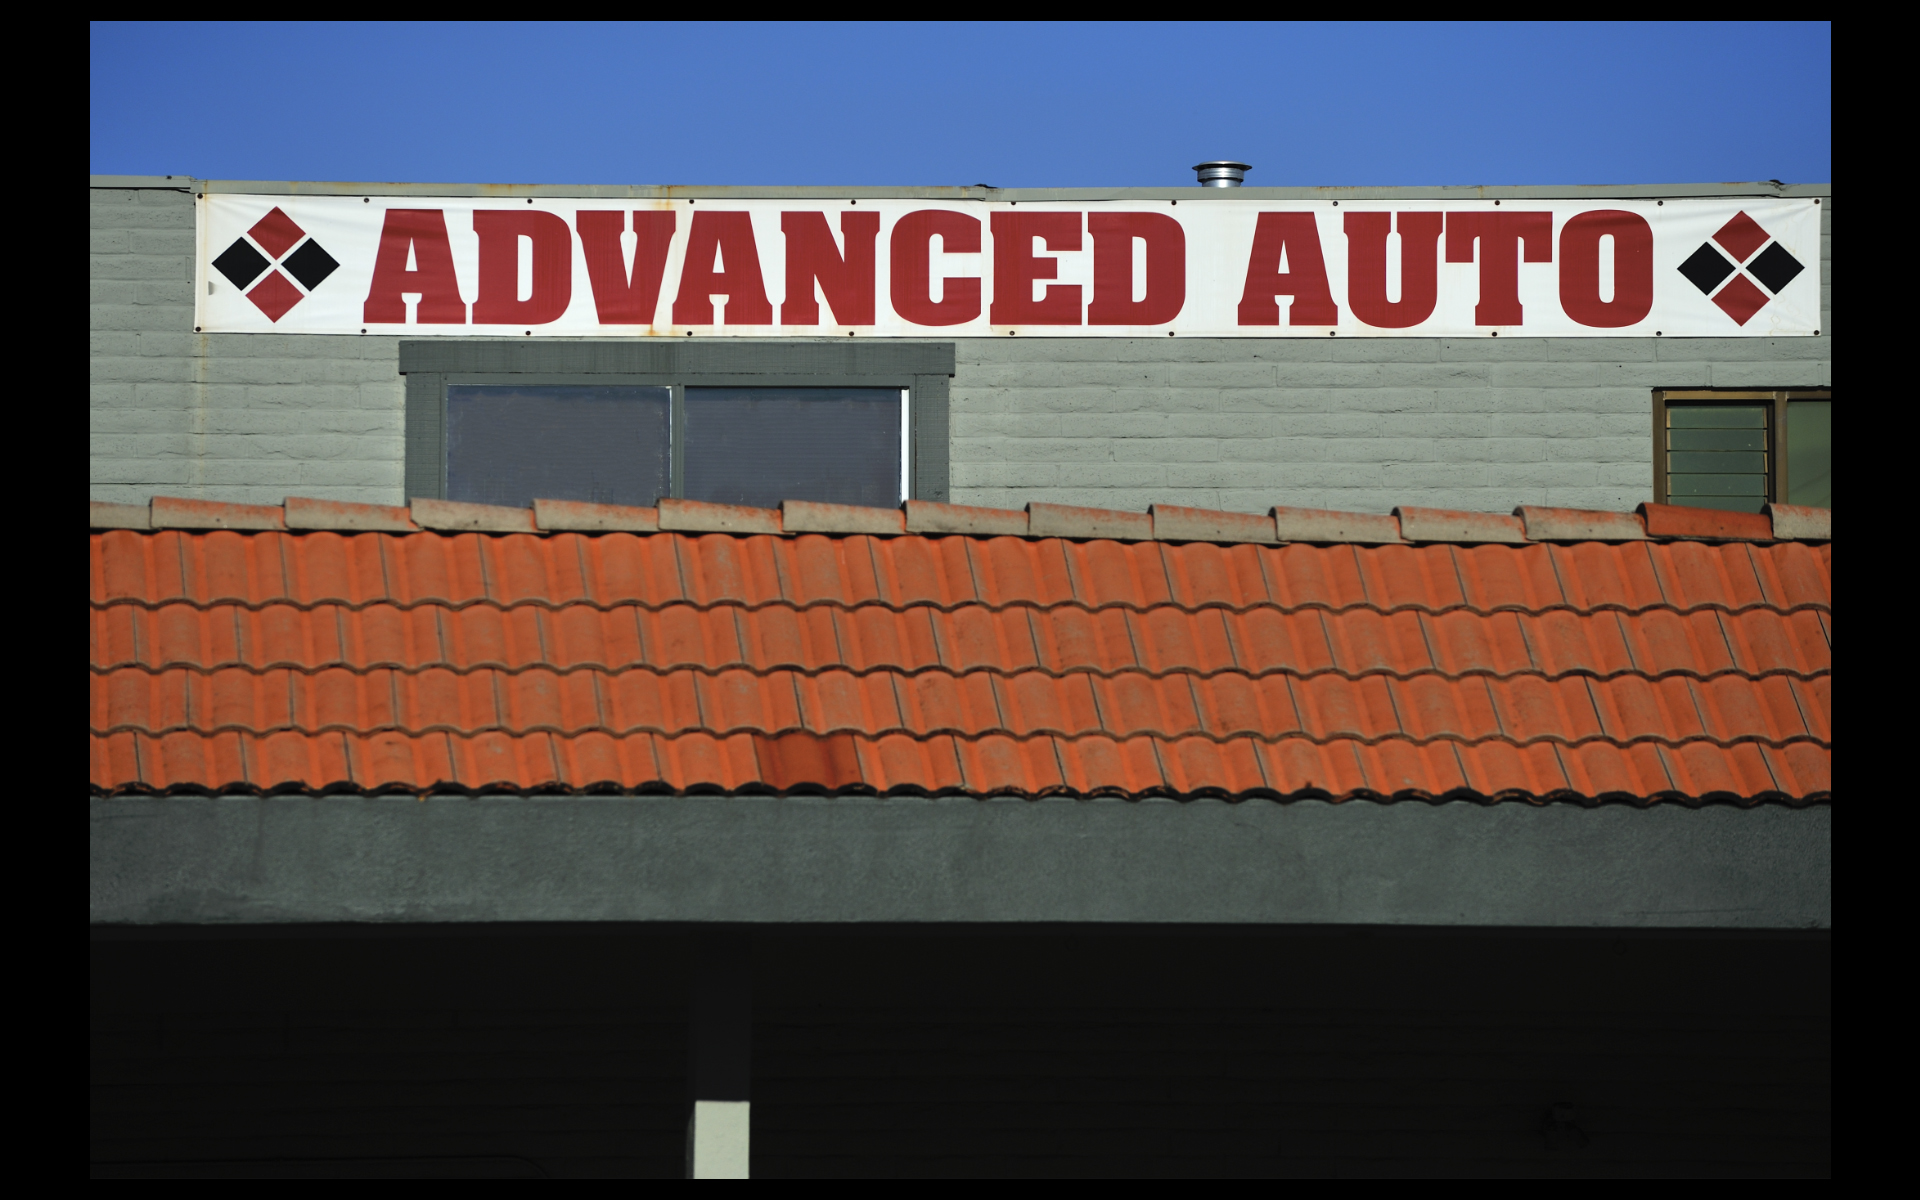 ROOF TOP SIGNAGE_2016_05-15D3_135_xx_72.jpg